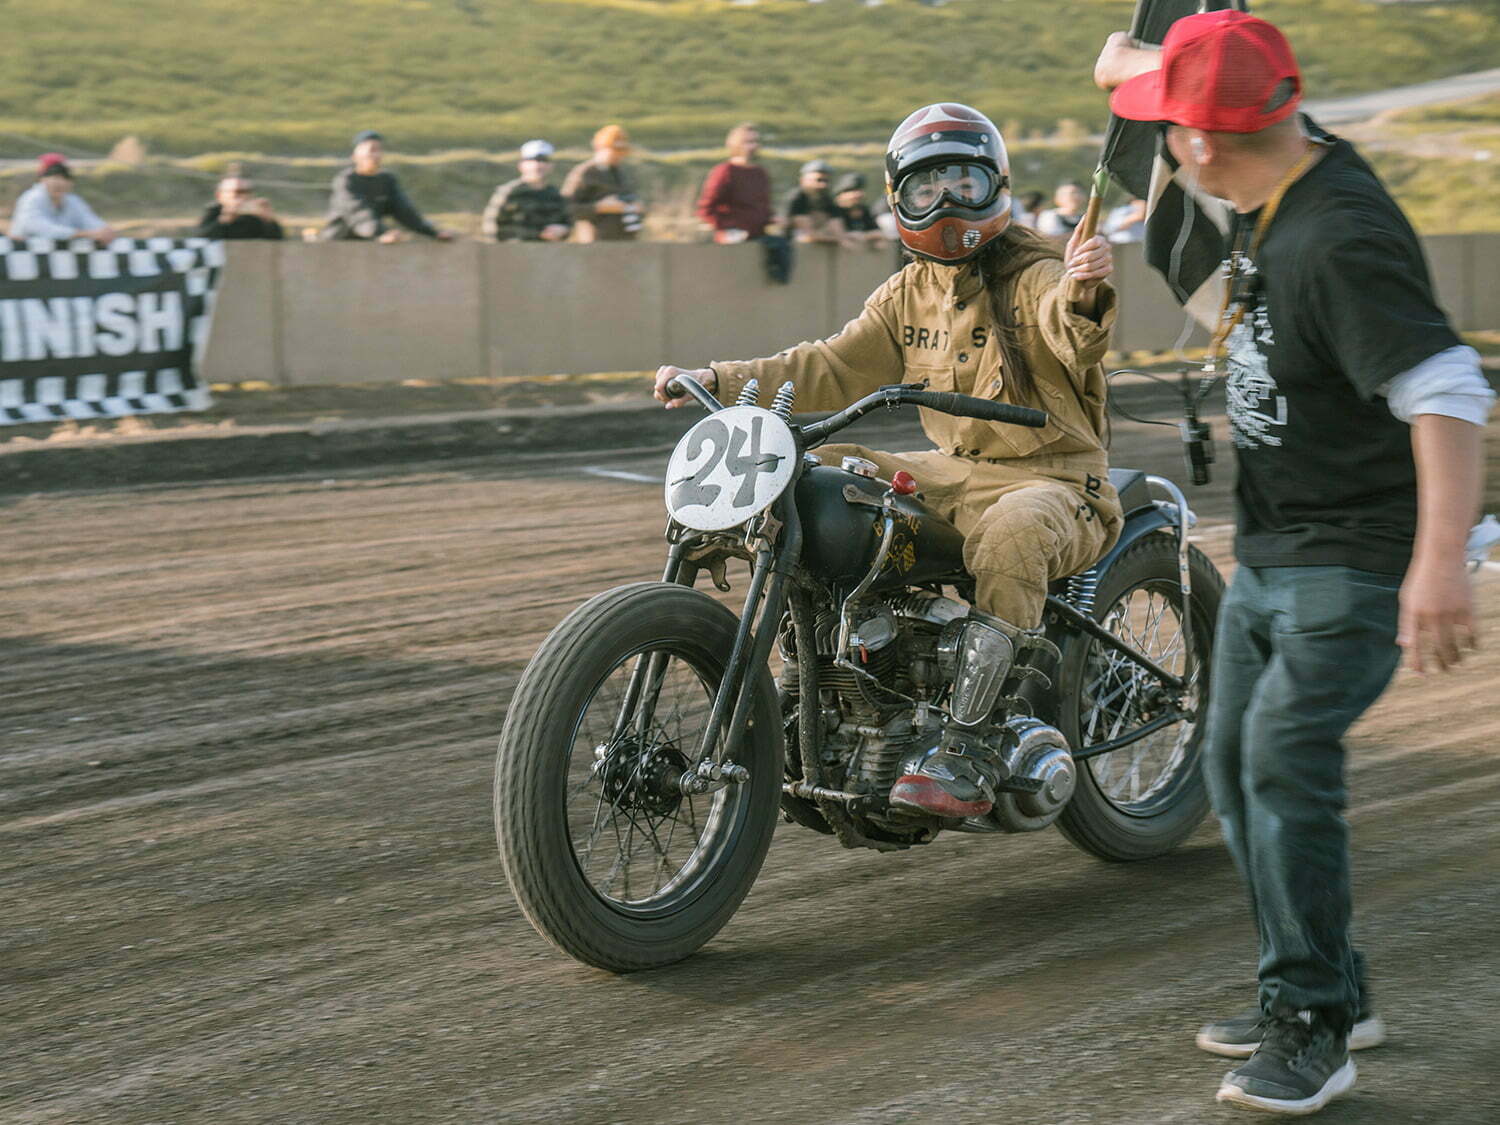 motorcycle rider in bratstyle gear grabbing checkered flag